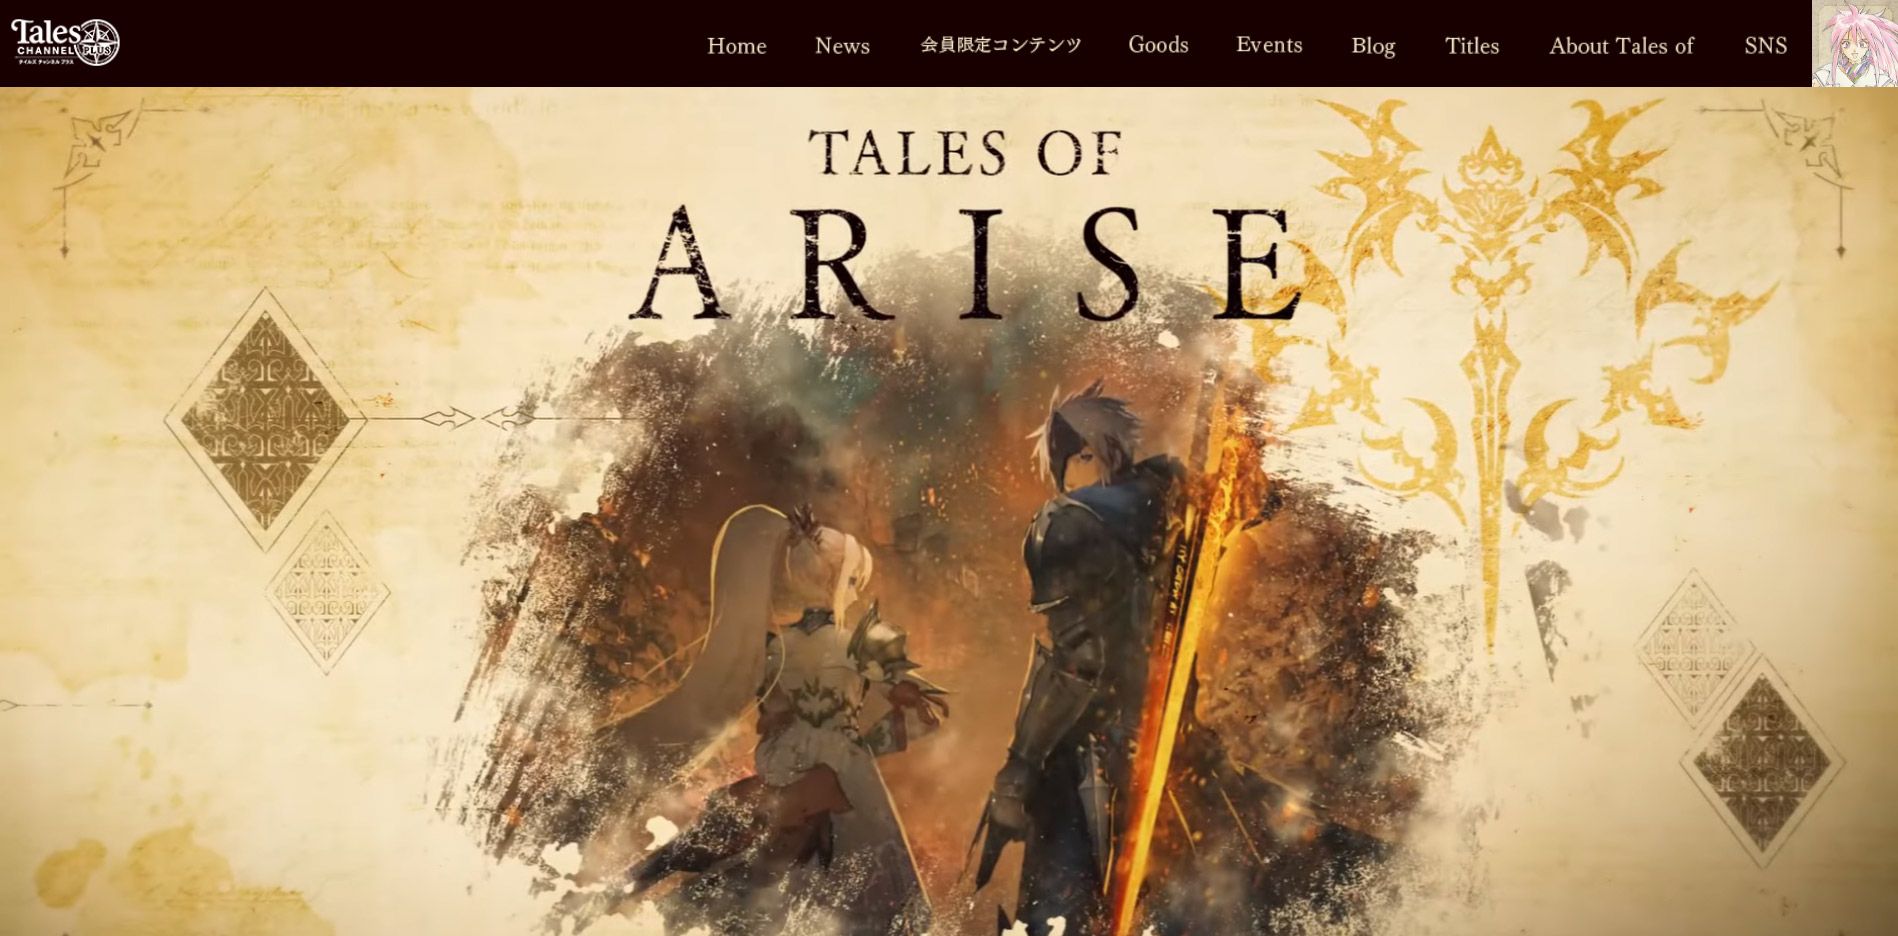 Tales Channel Plus Website for Japanese Tales Fans Gets Revamped Chronicles ver3 (Beta) of Series fansite